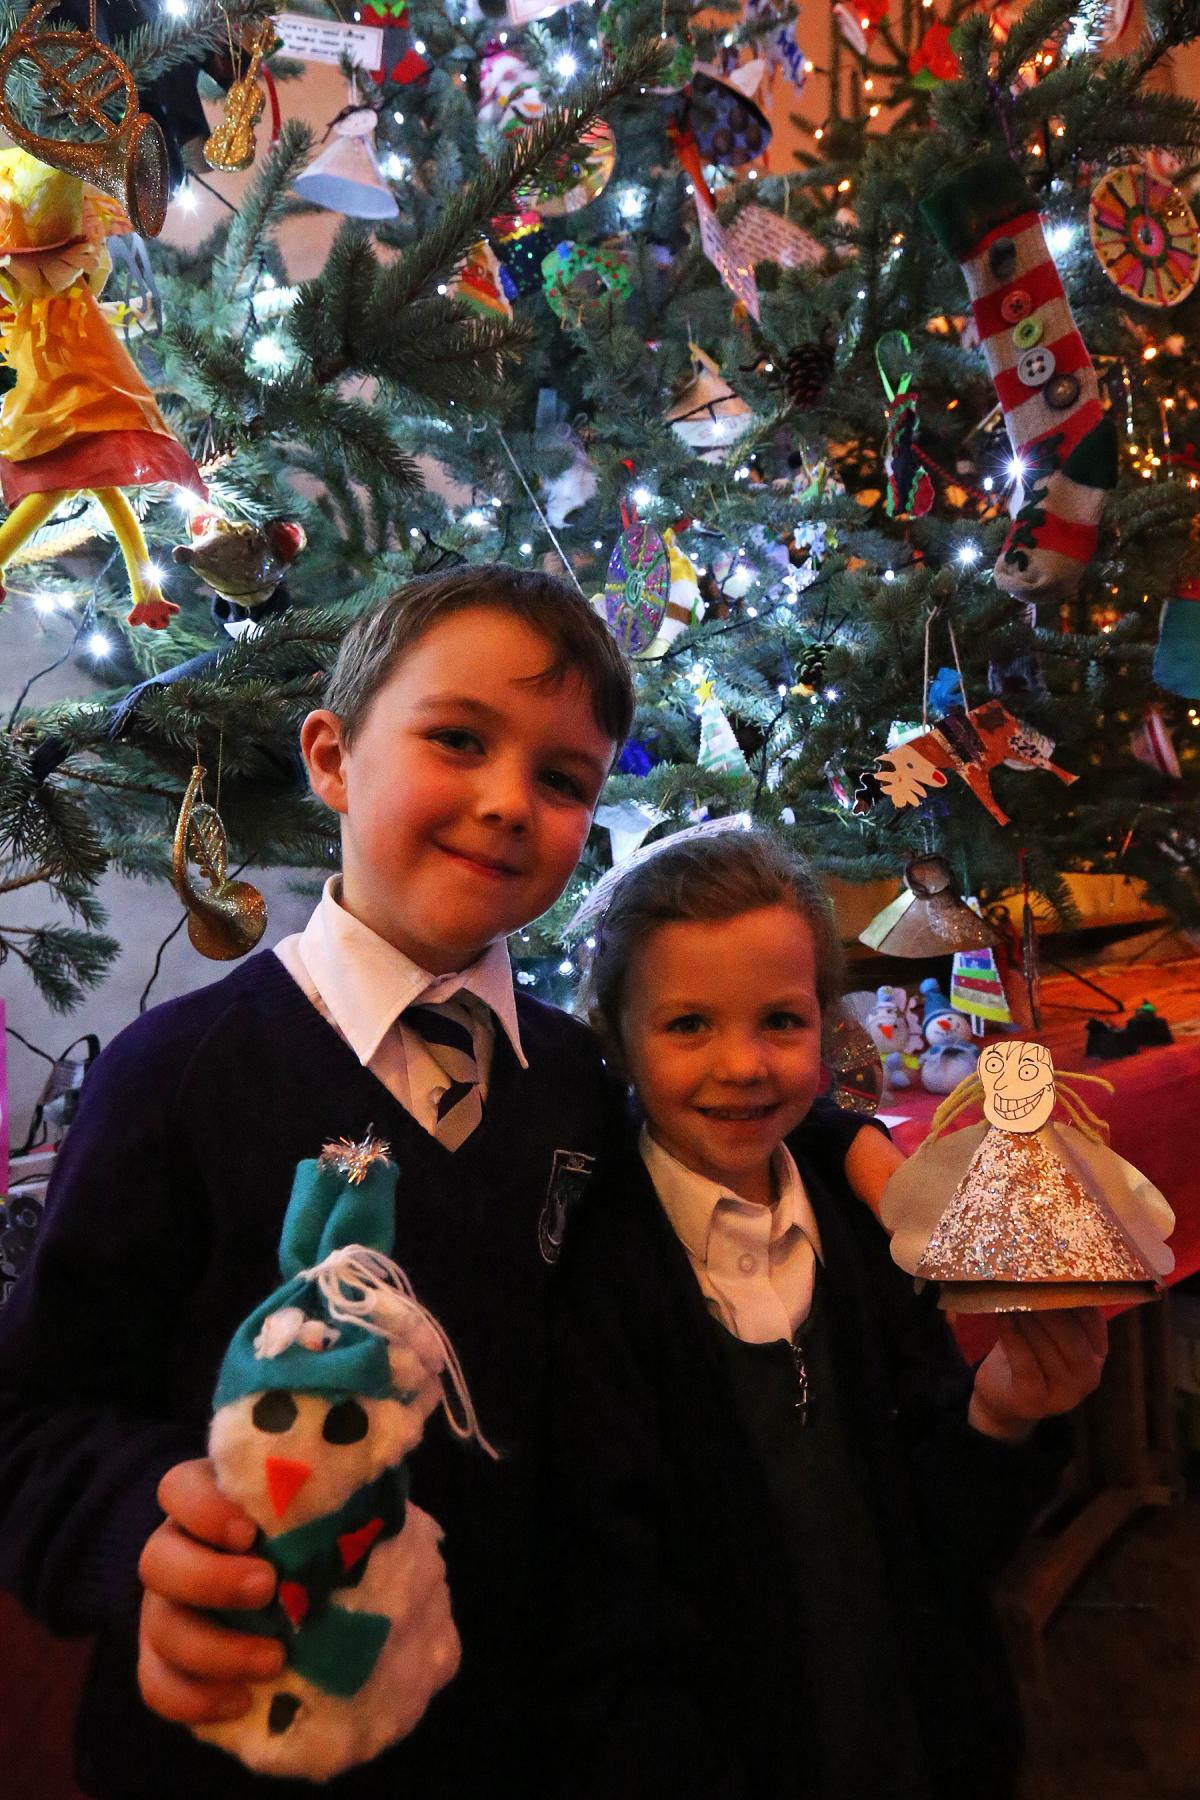 Children from Epping Primary School with decorations for the school tree in the Christmas Tree festival in St. John the Baptist​ church in Epping. Essex. (4/12/2015) EL86063_5